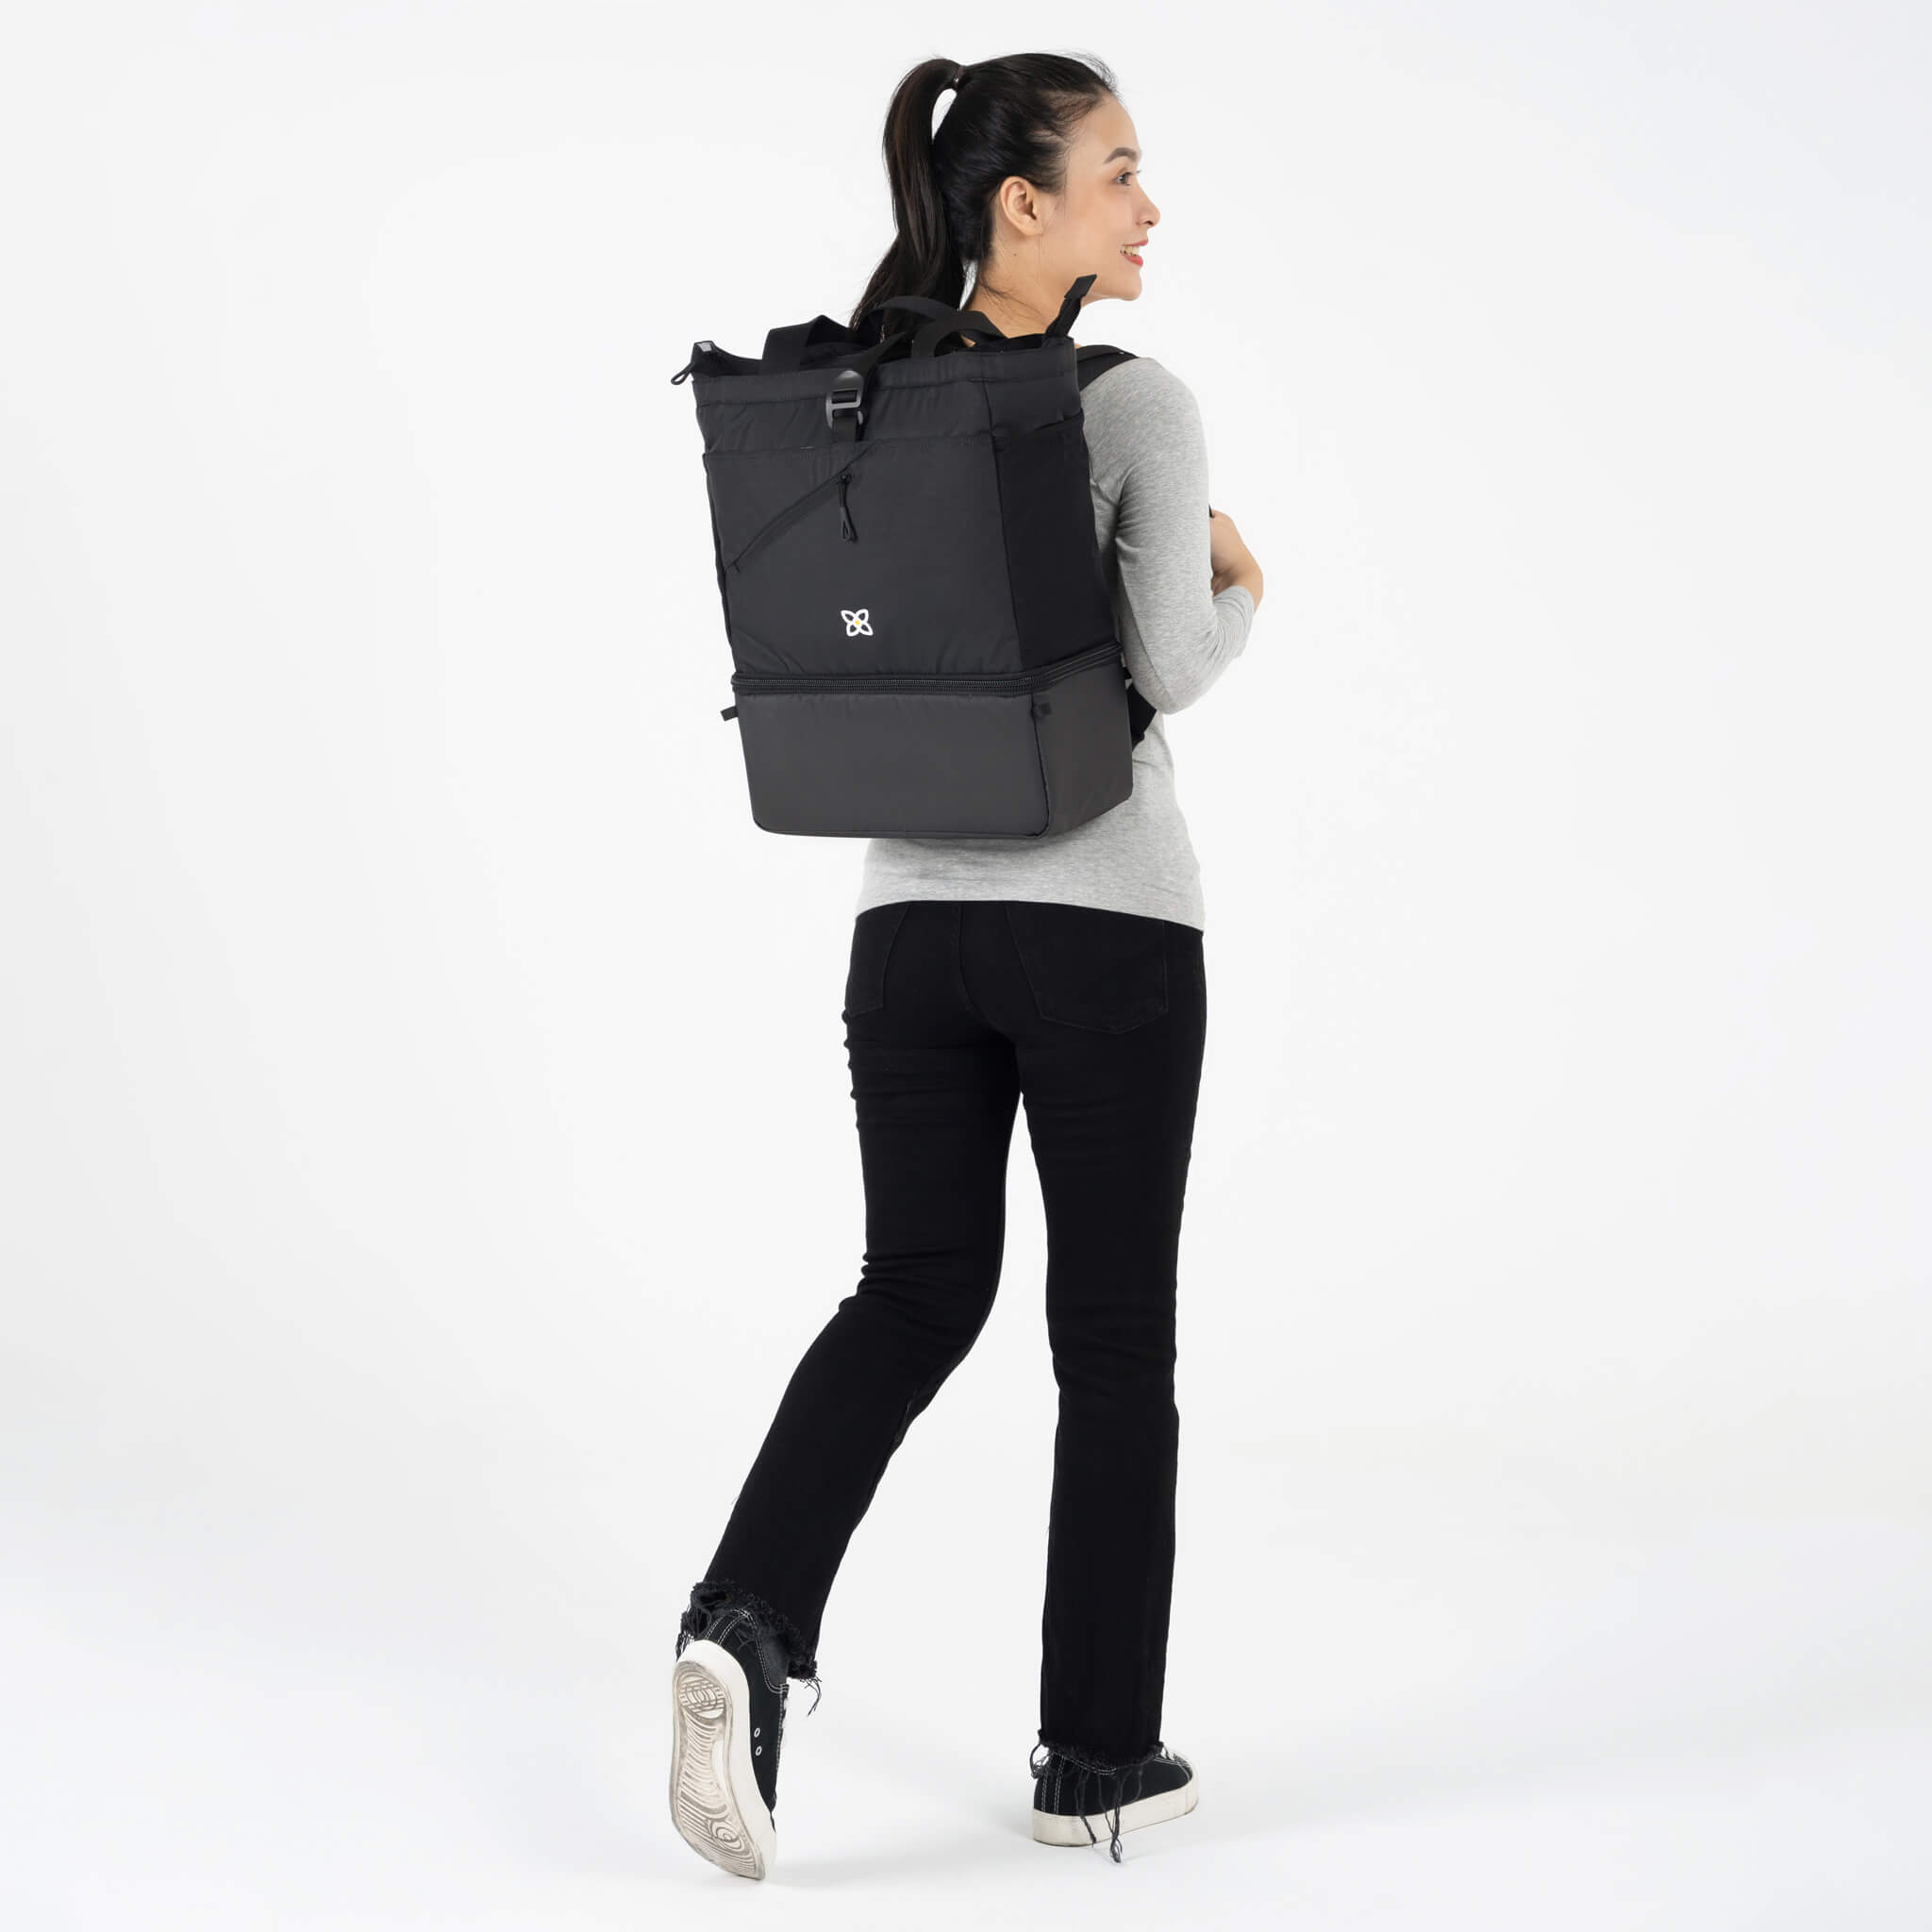 A model facing to the back. She is wearing a gray top and black leggings. She carries Sherpani bag, the Terra in Raven, as a backpack. 